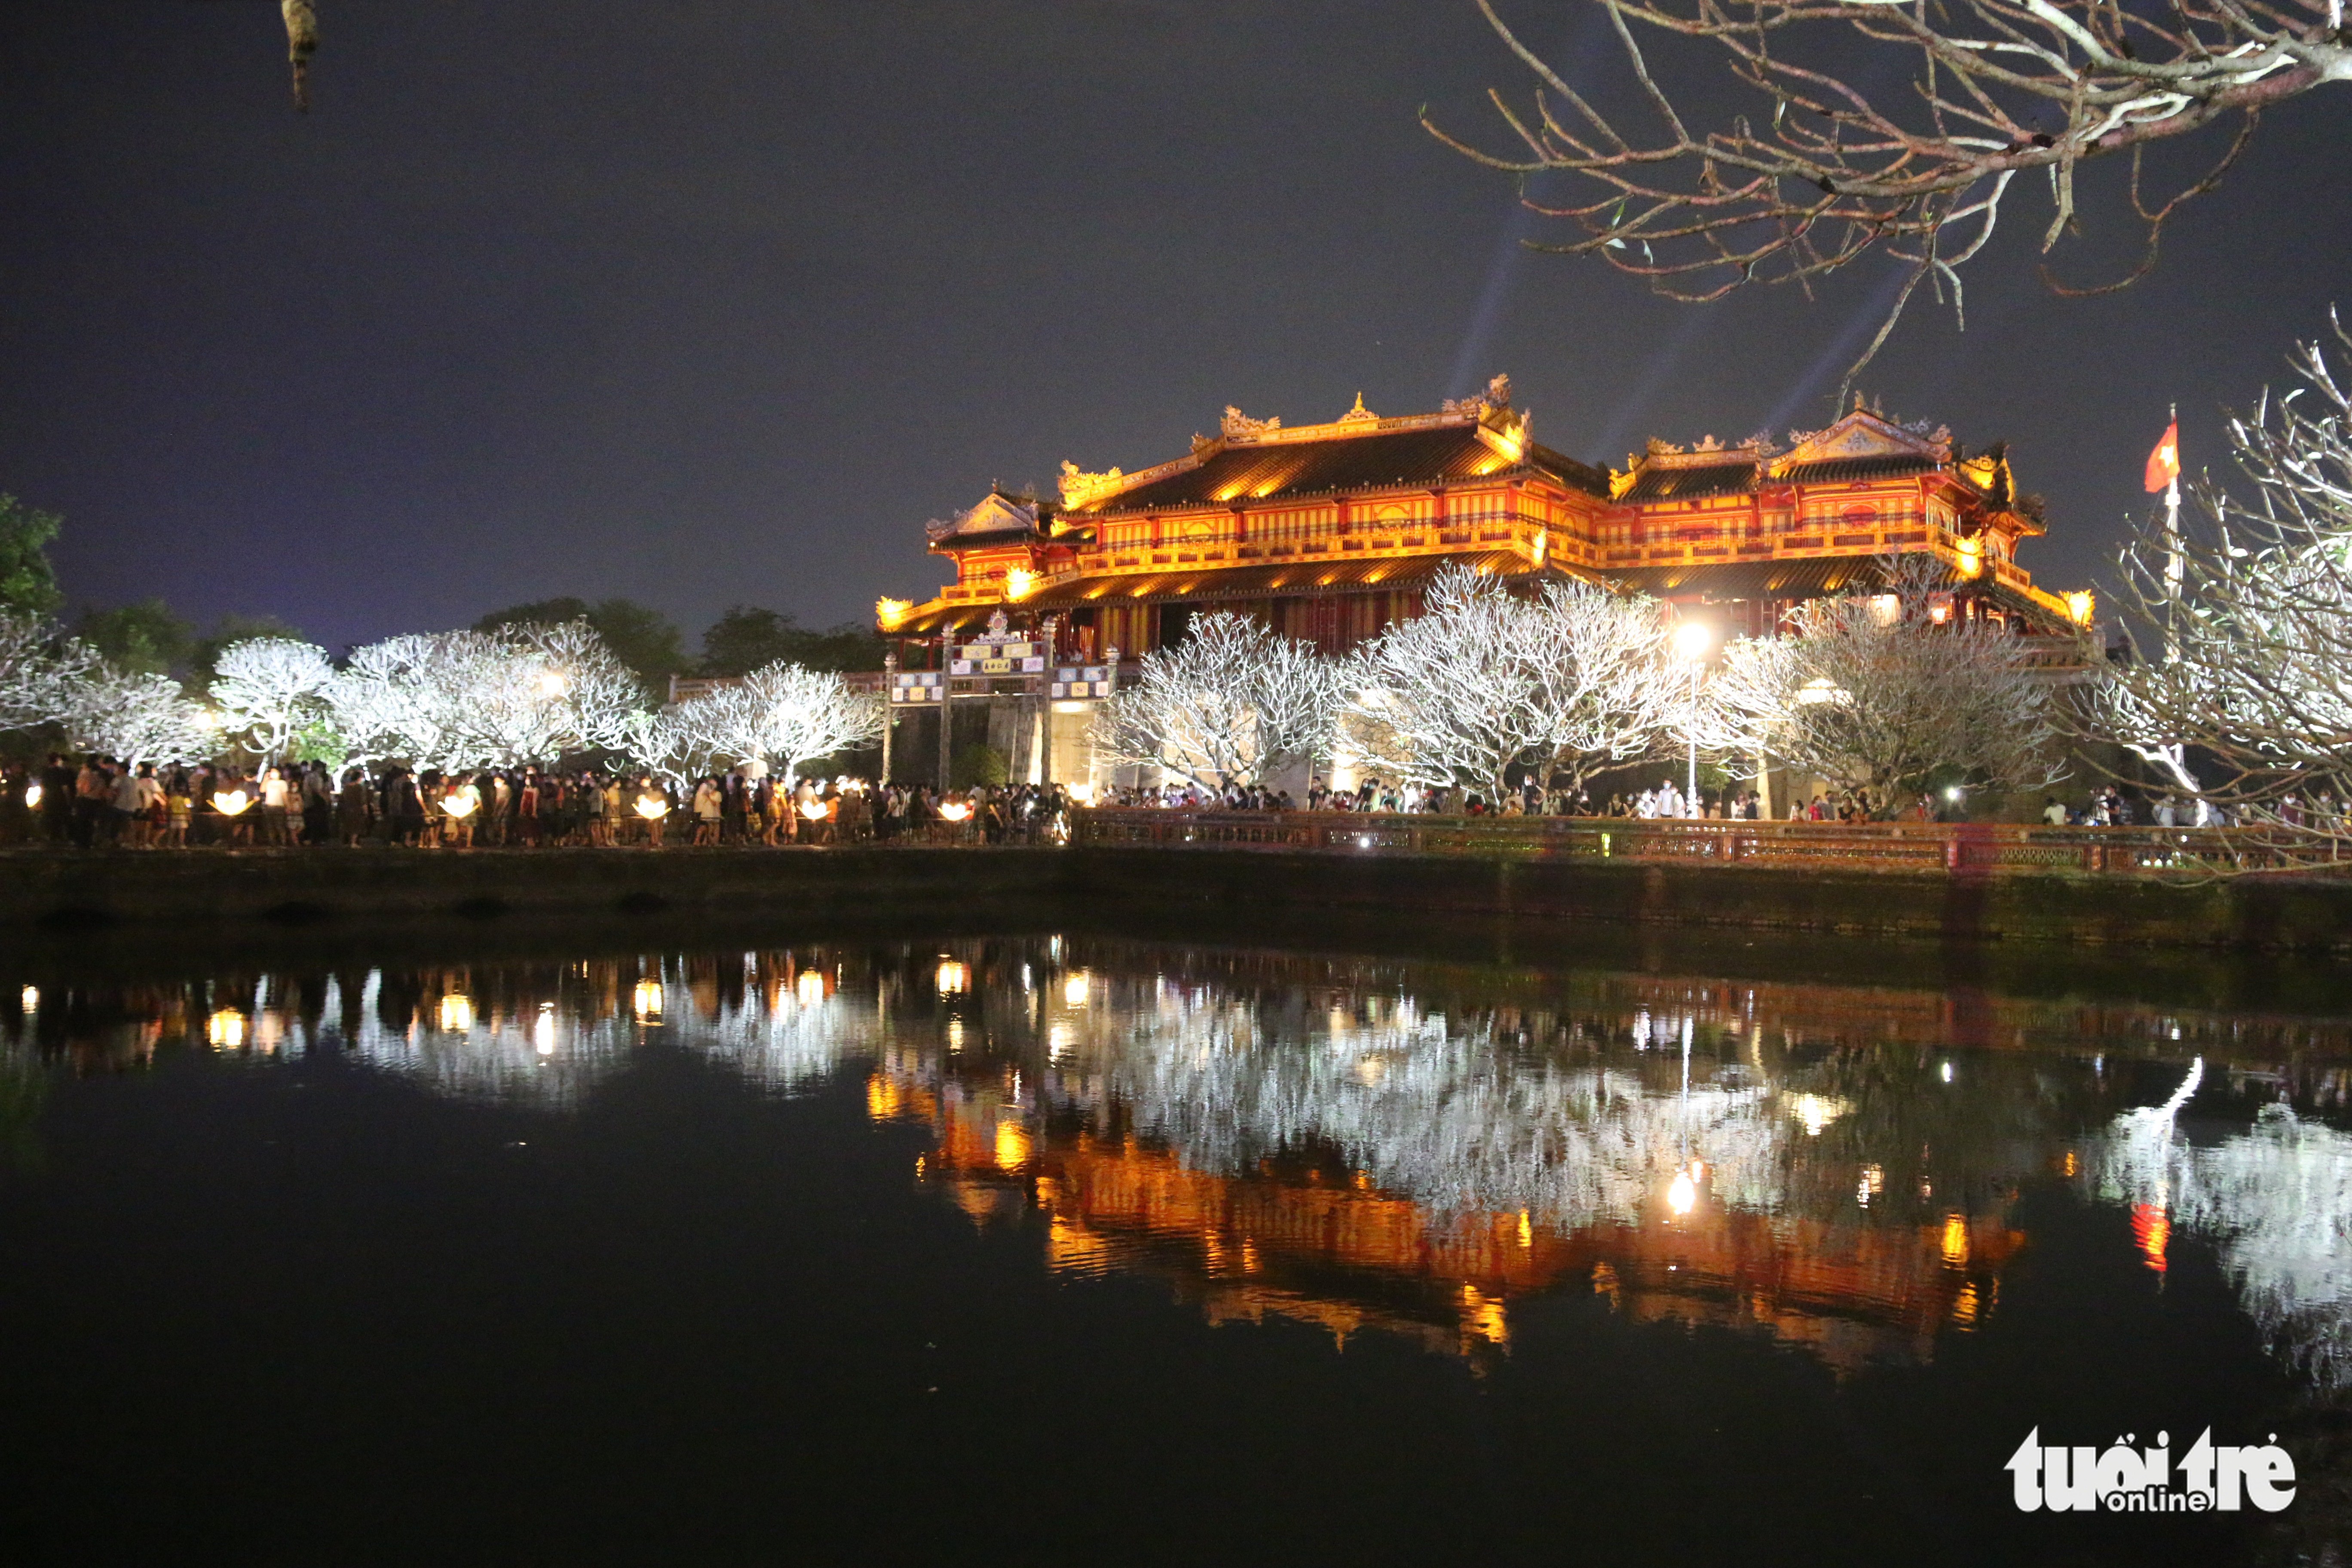 Free night admission to Hue citadel for visitors during Hue Festival 2022